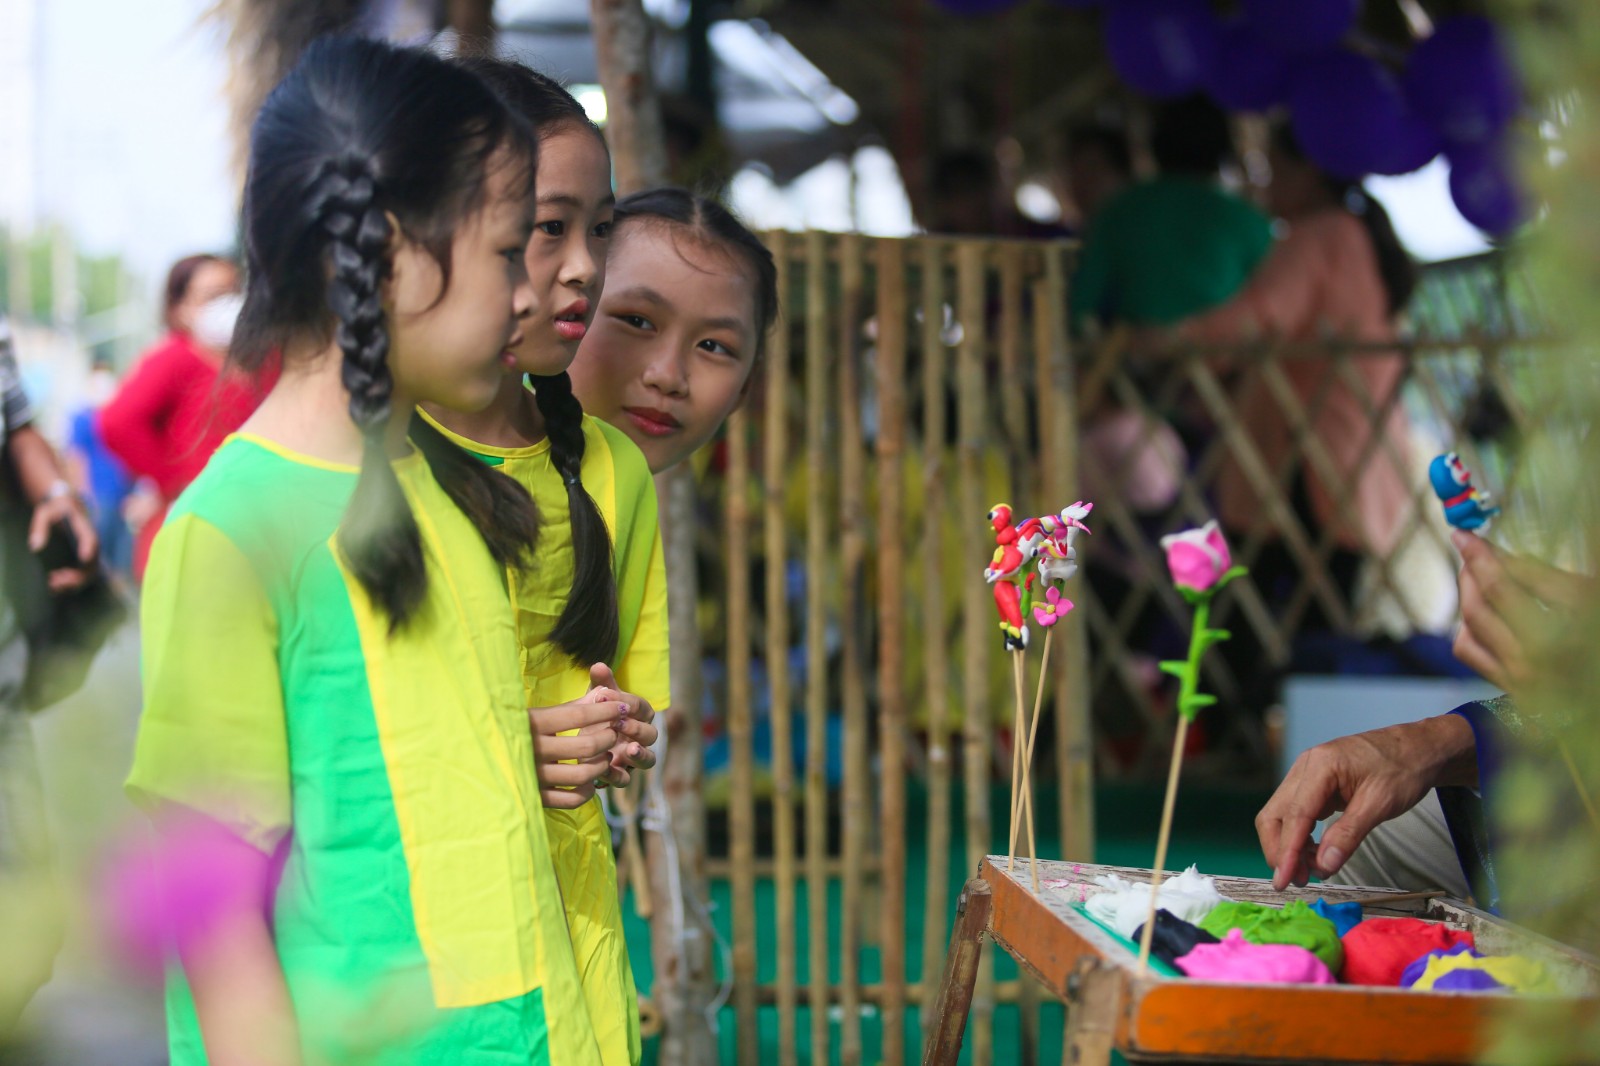 Children watch how to he (edible toy statuettes) are made at the ‘Tren ben duoi thuyen’ Fruit Week in District 8, Ho Chi Minh City, May 28, 2022. Photo: Chau Tuan / Tuoi Tre